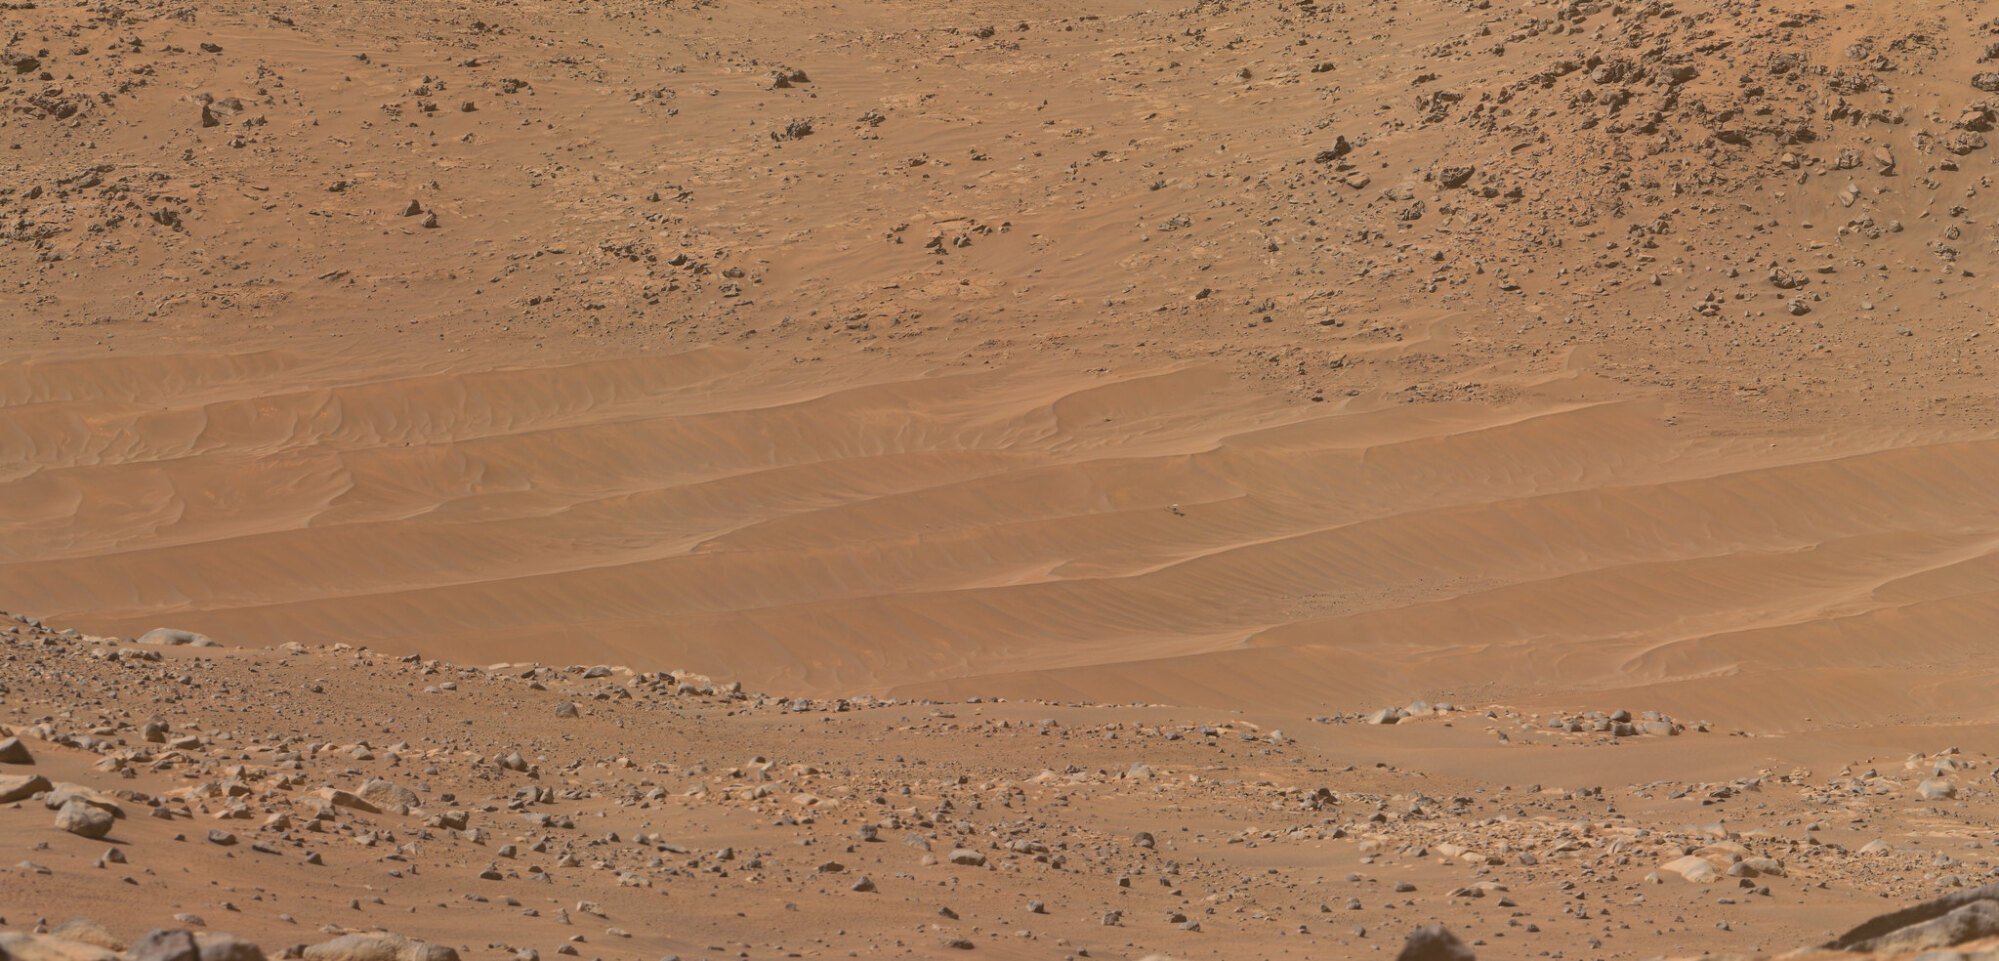 A farther-out view of Ingenuity among sandy desert terrain.